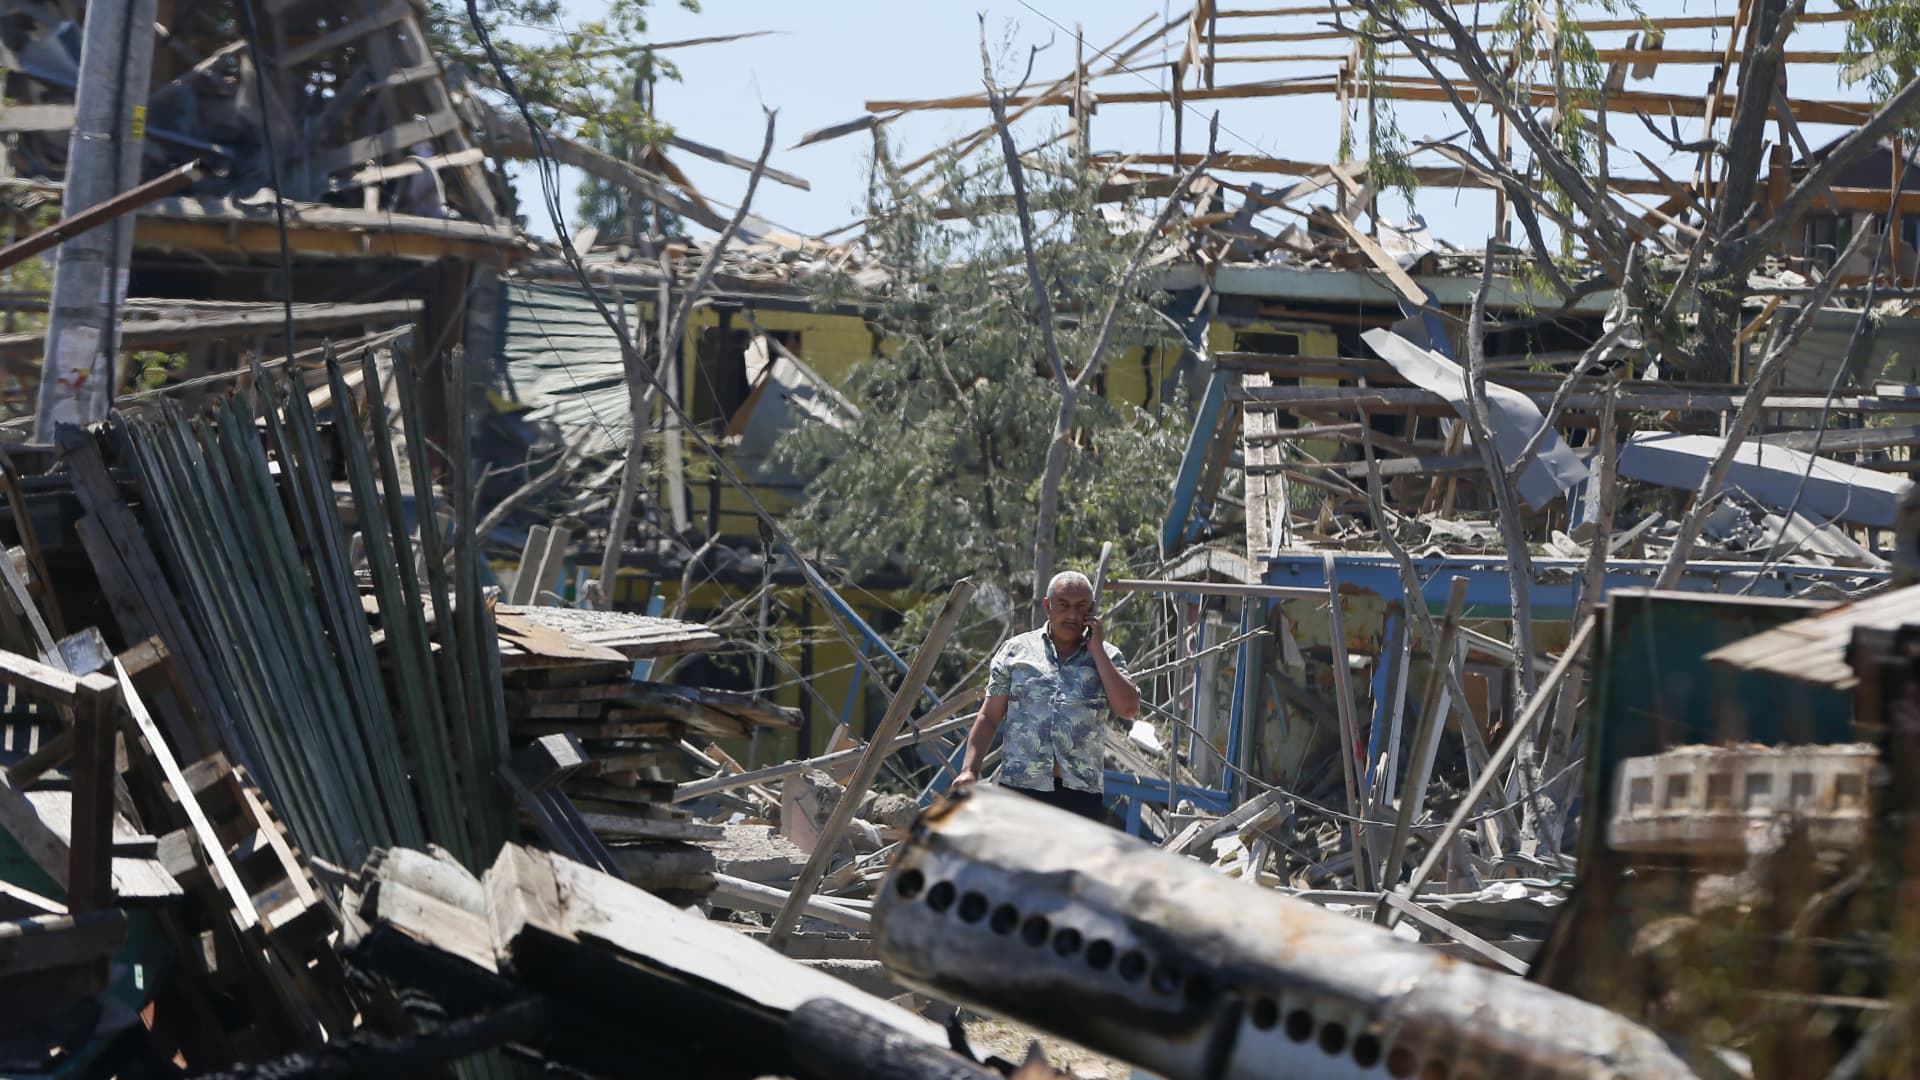 A view of damaged buildings caused by a rocket strike in Odesa region, Ukraine on 26 July 2022. Russia launched a massive missile attack on the Odesa region and Mykolaiv, as local media informed.